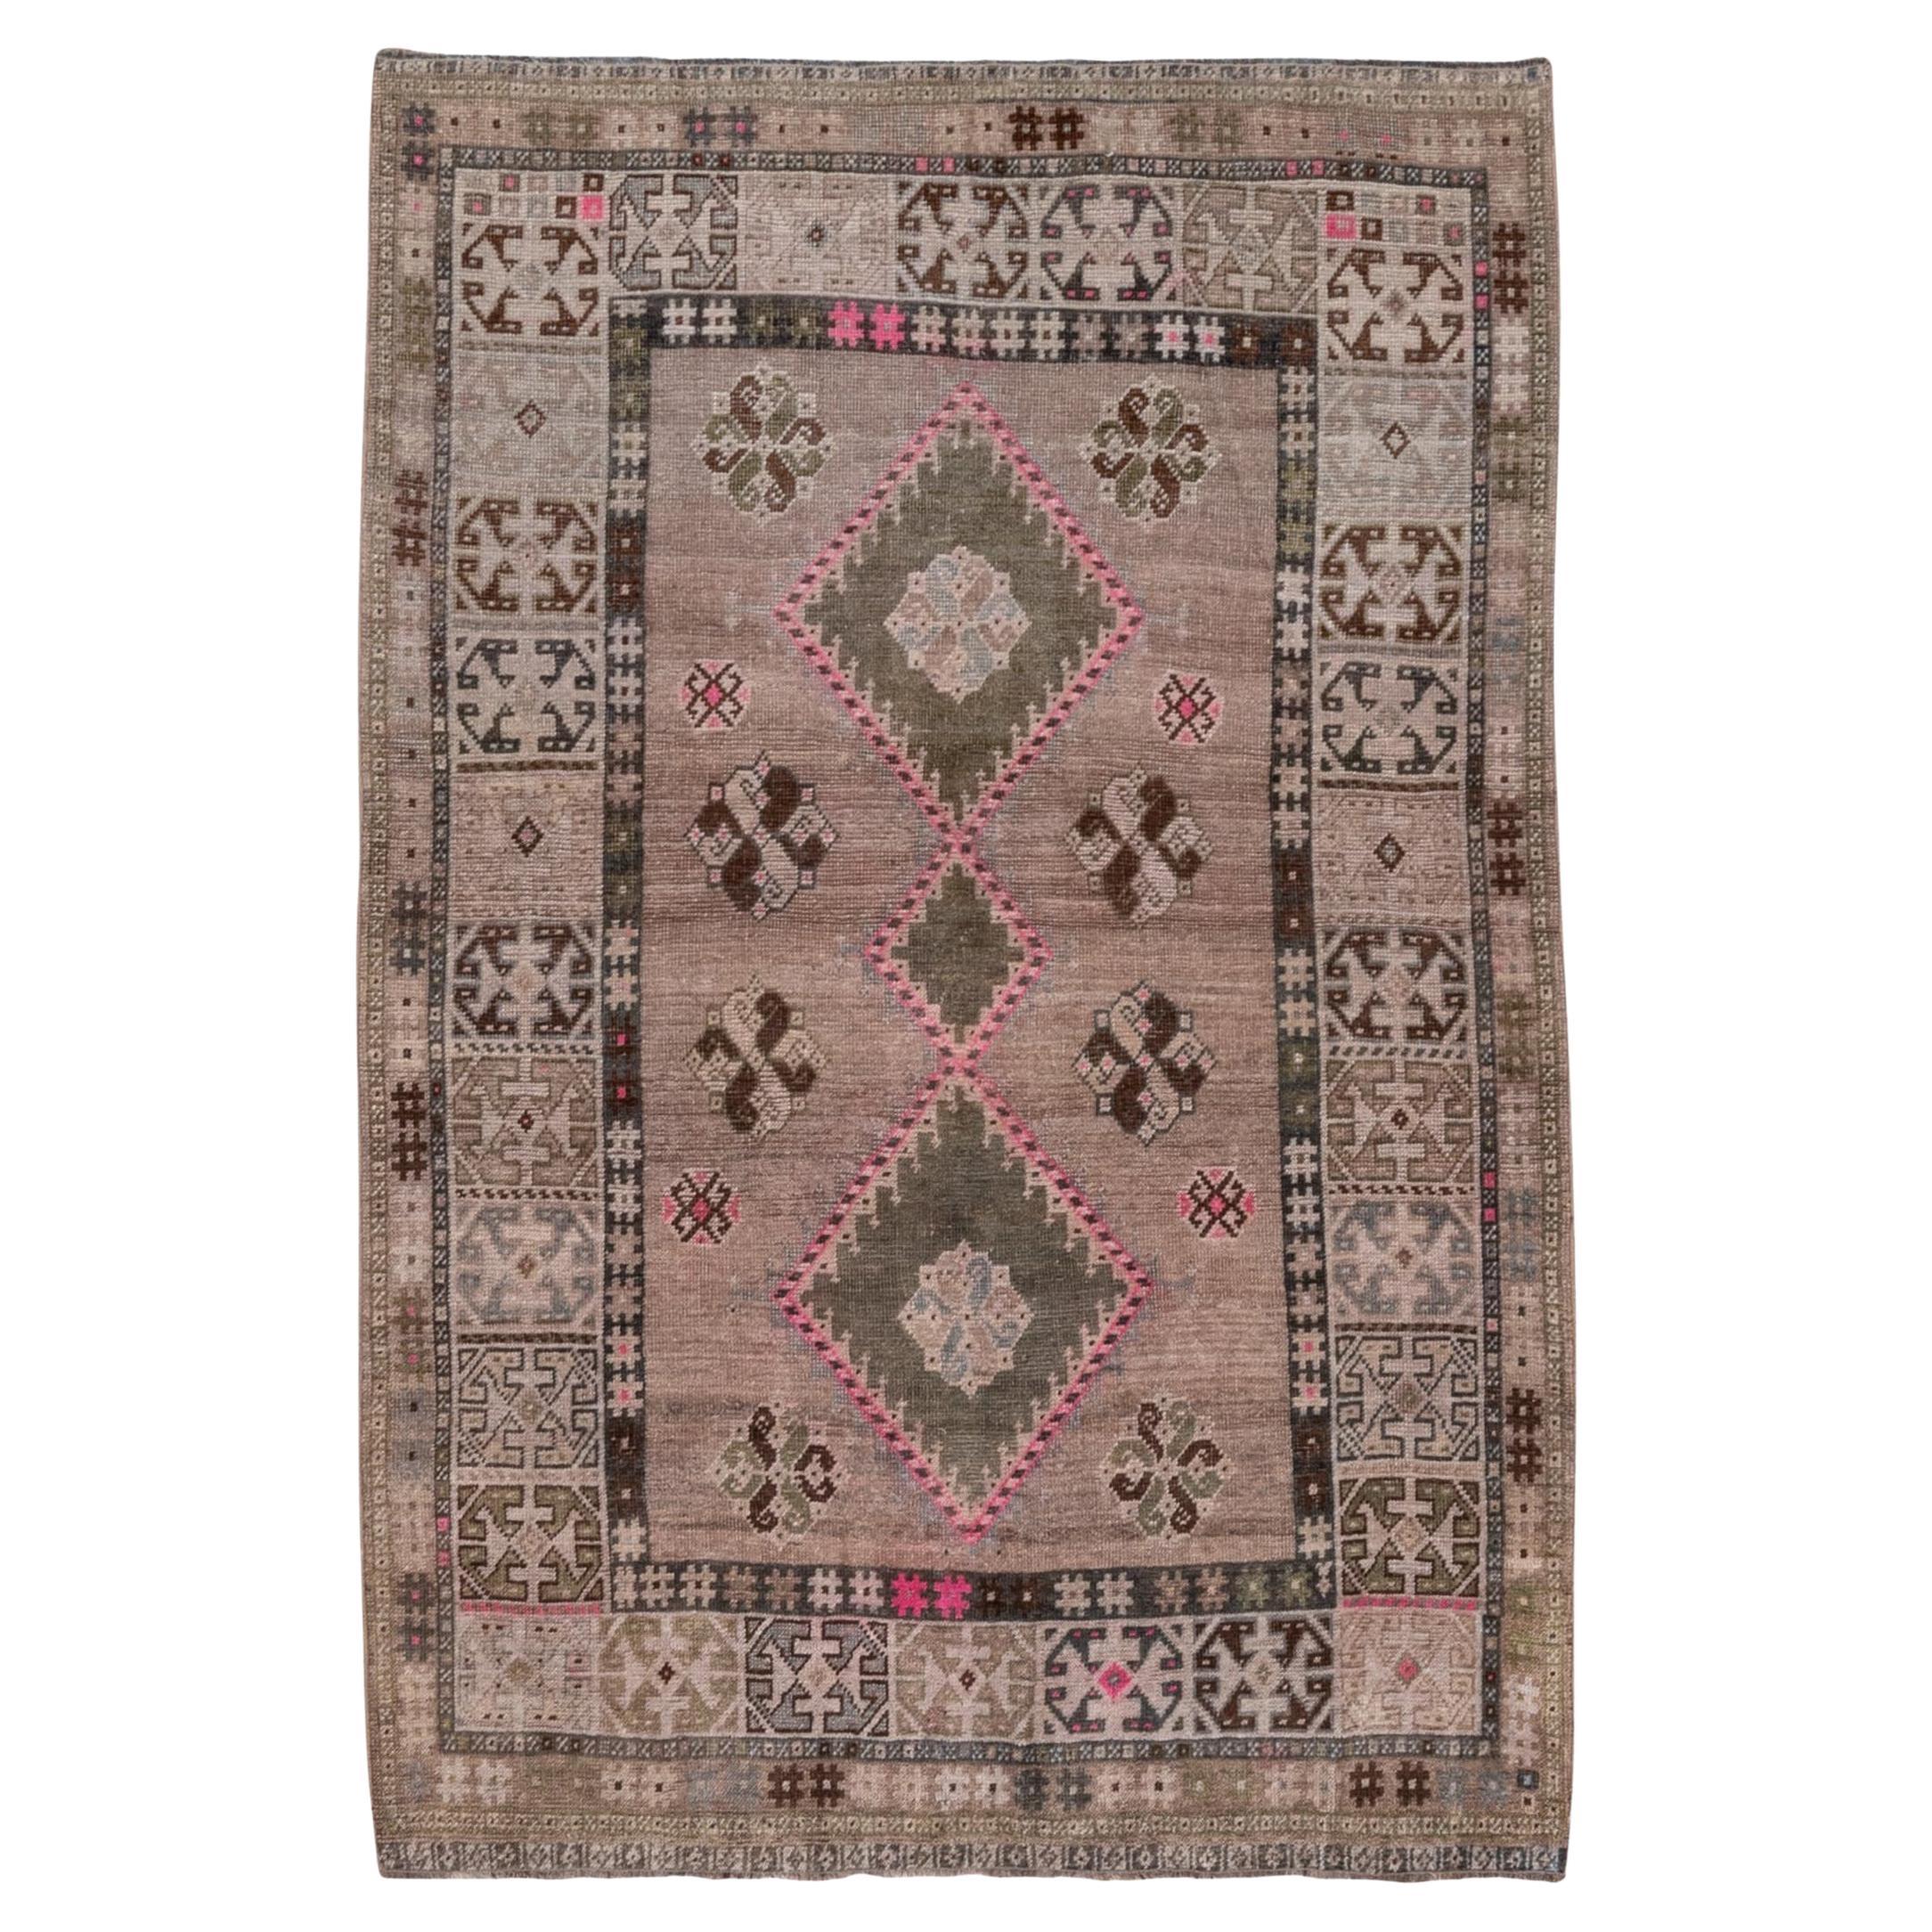 Antique Persian Gabbeh Rug, Light Brown Field, Pink & Green Accents, circa 1930s For Sale